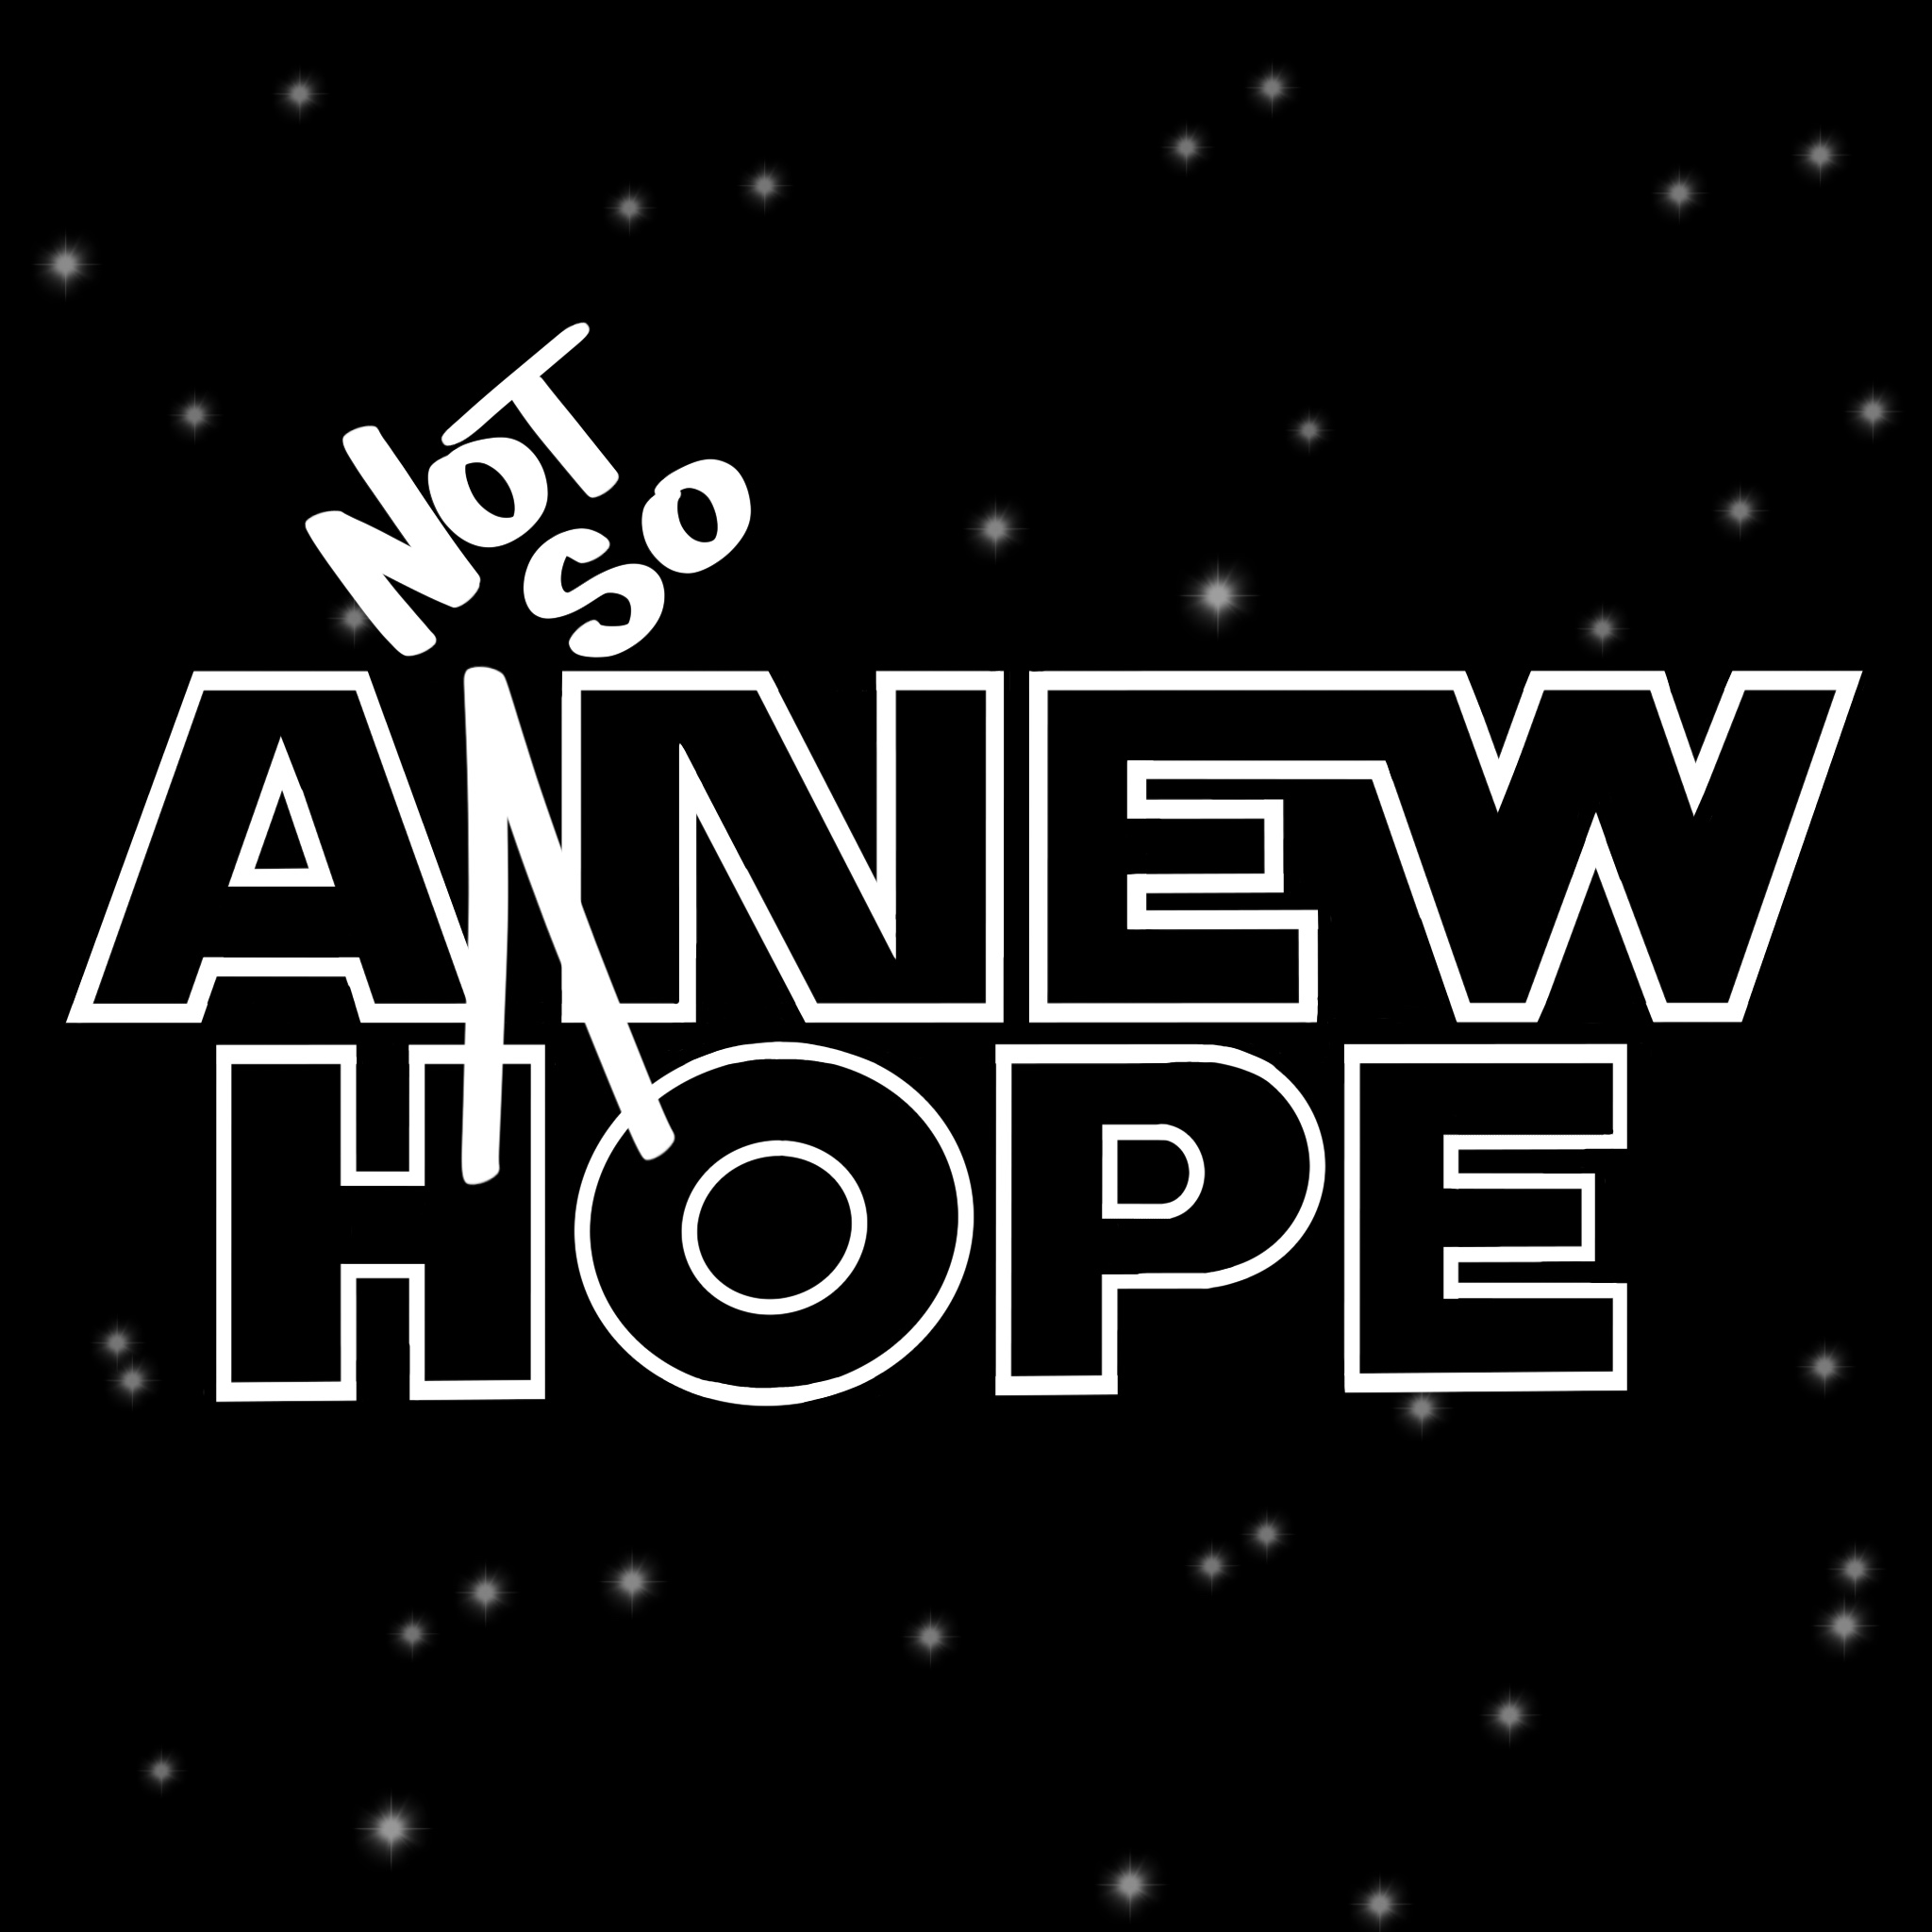 A Not So New Hope Image